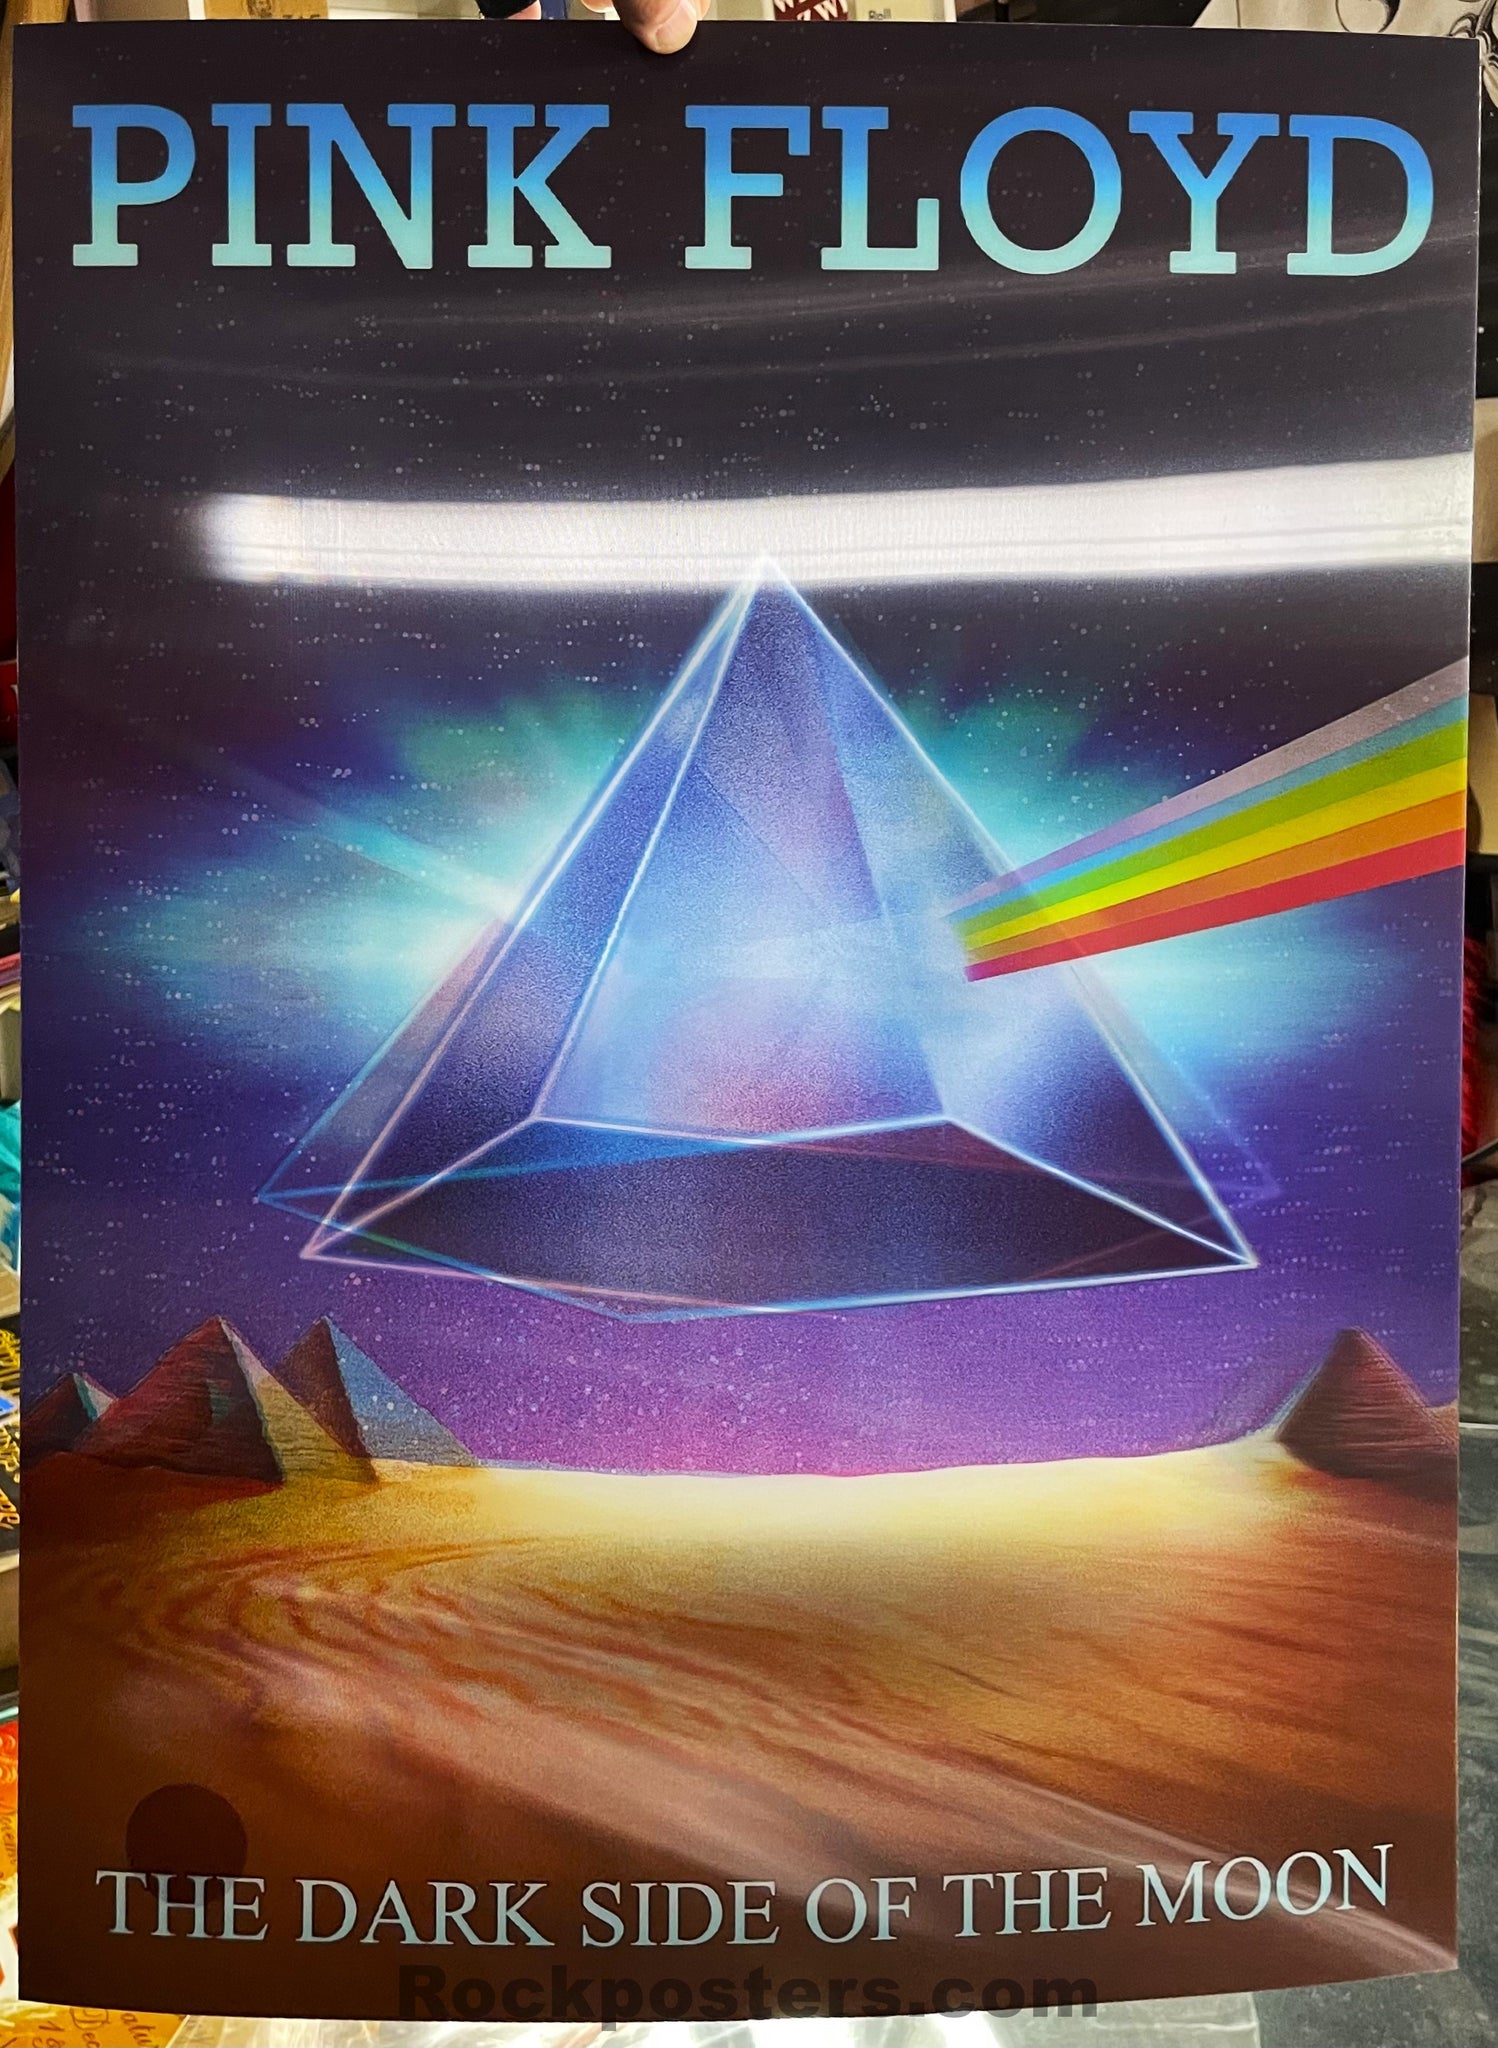 AUCTION - Pink Floyd - Dark Side of the Moon - 50th Anniversary - 3D Lenticular Poster - Mint